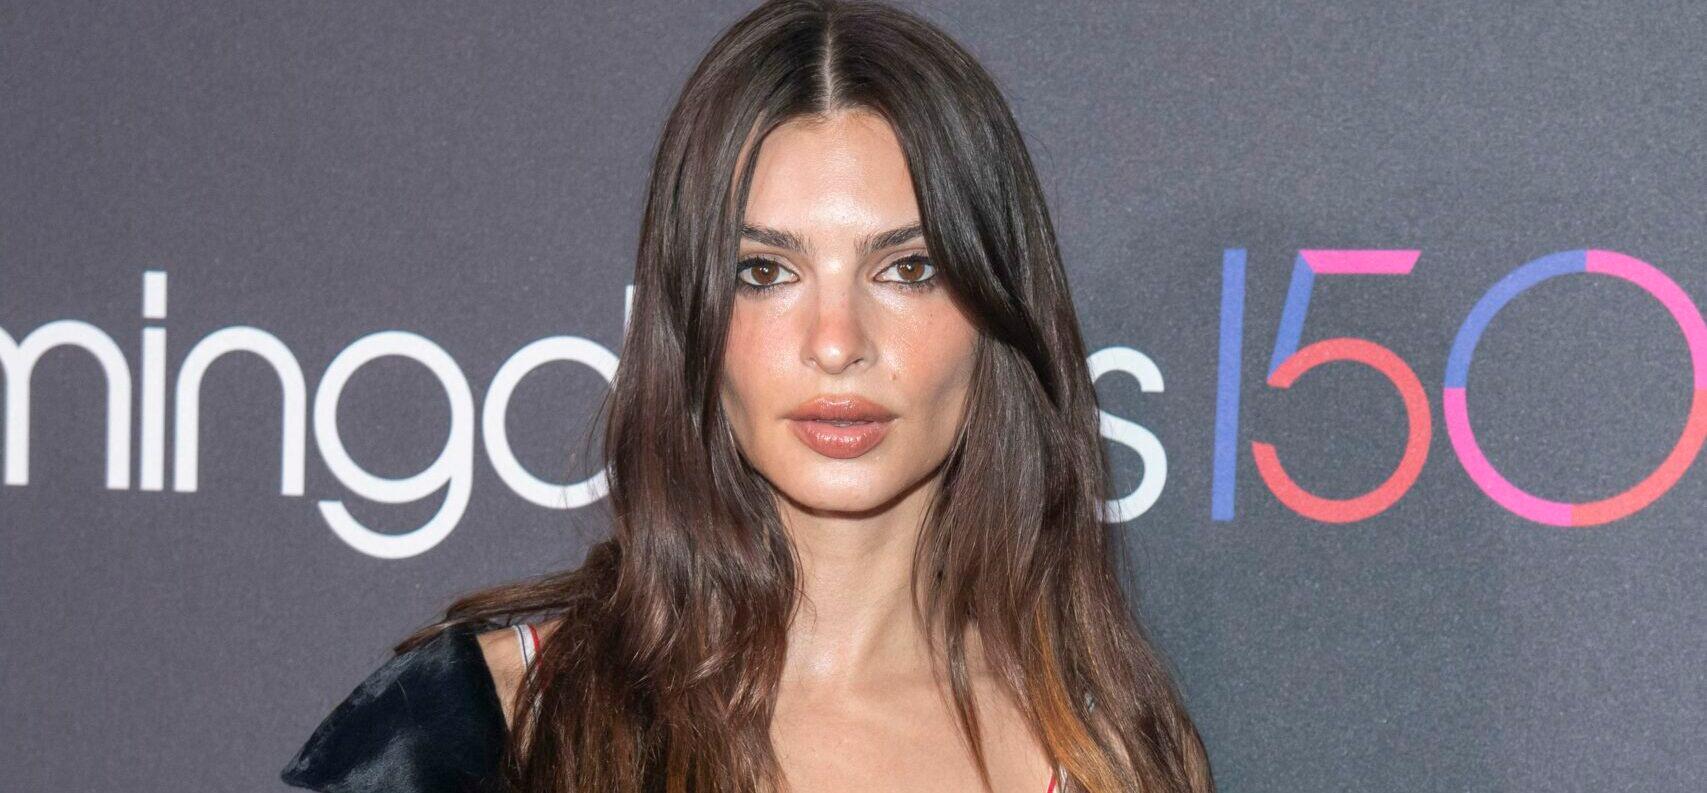 Emily Ratajkowski Speaks On Why She Walked Away From Acting, Romance With Pete Davidson